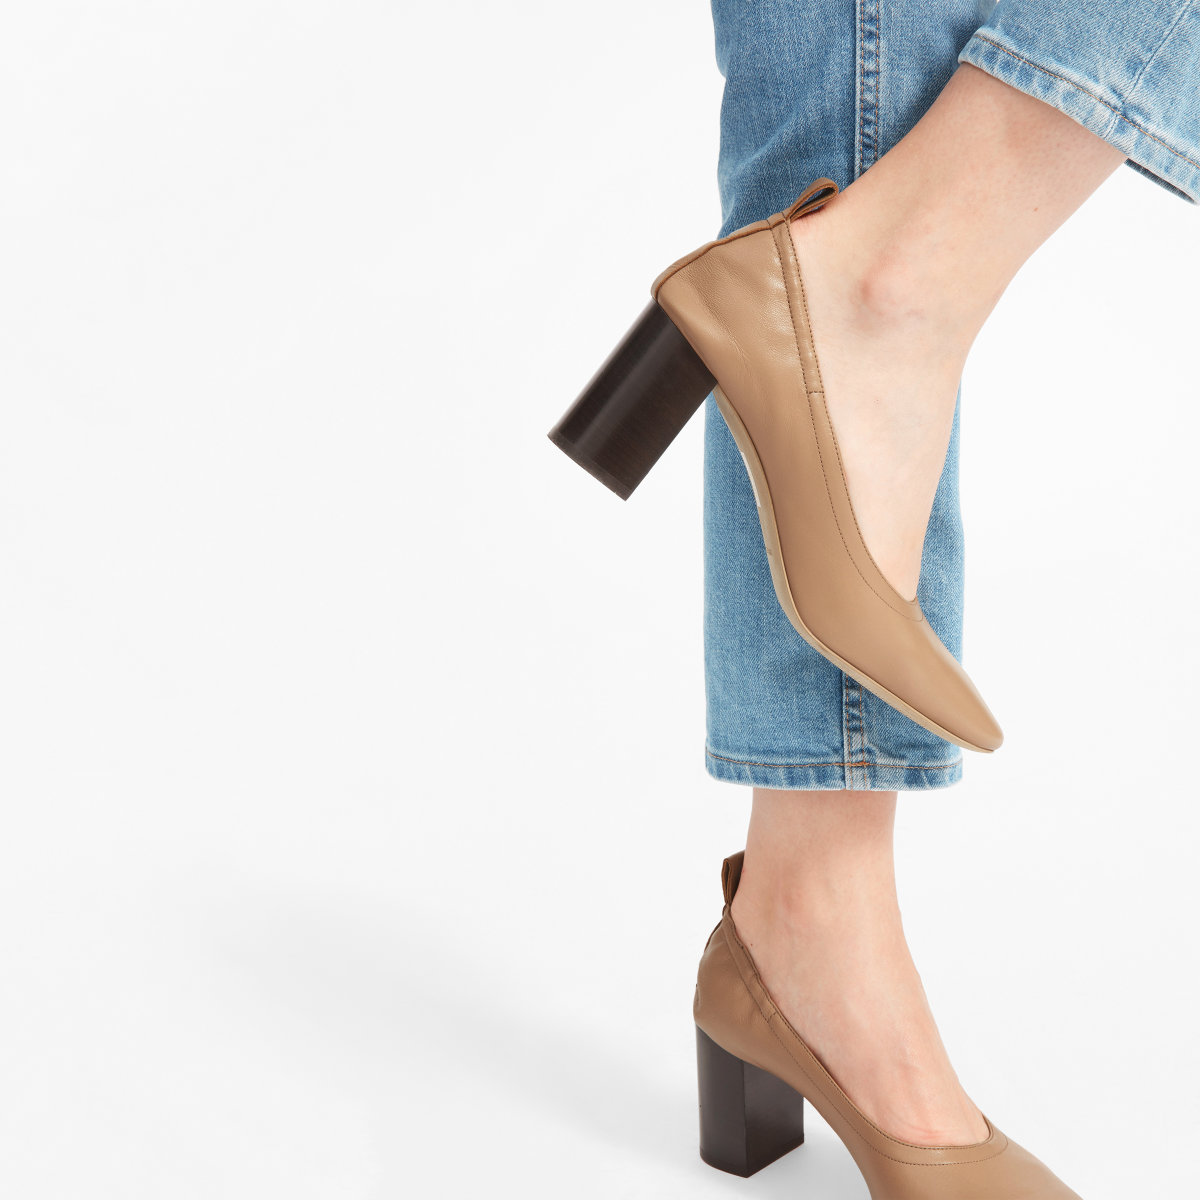 everlane day high heel review